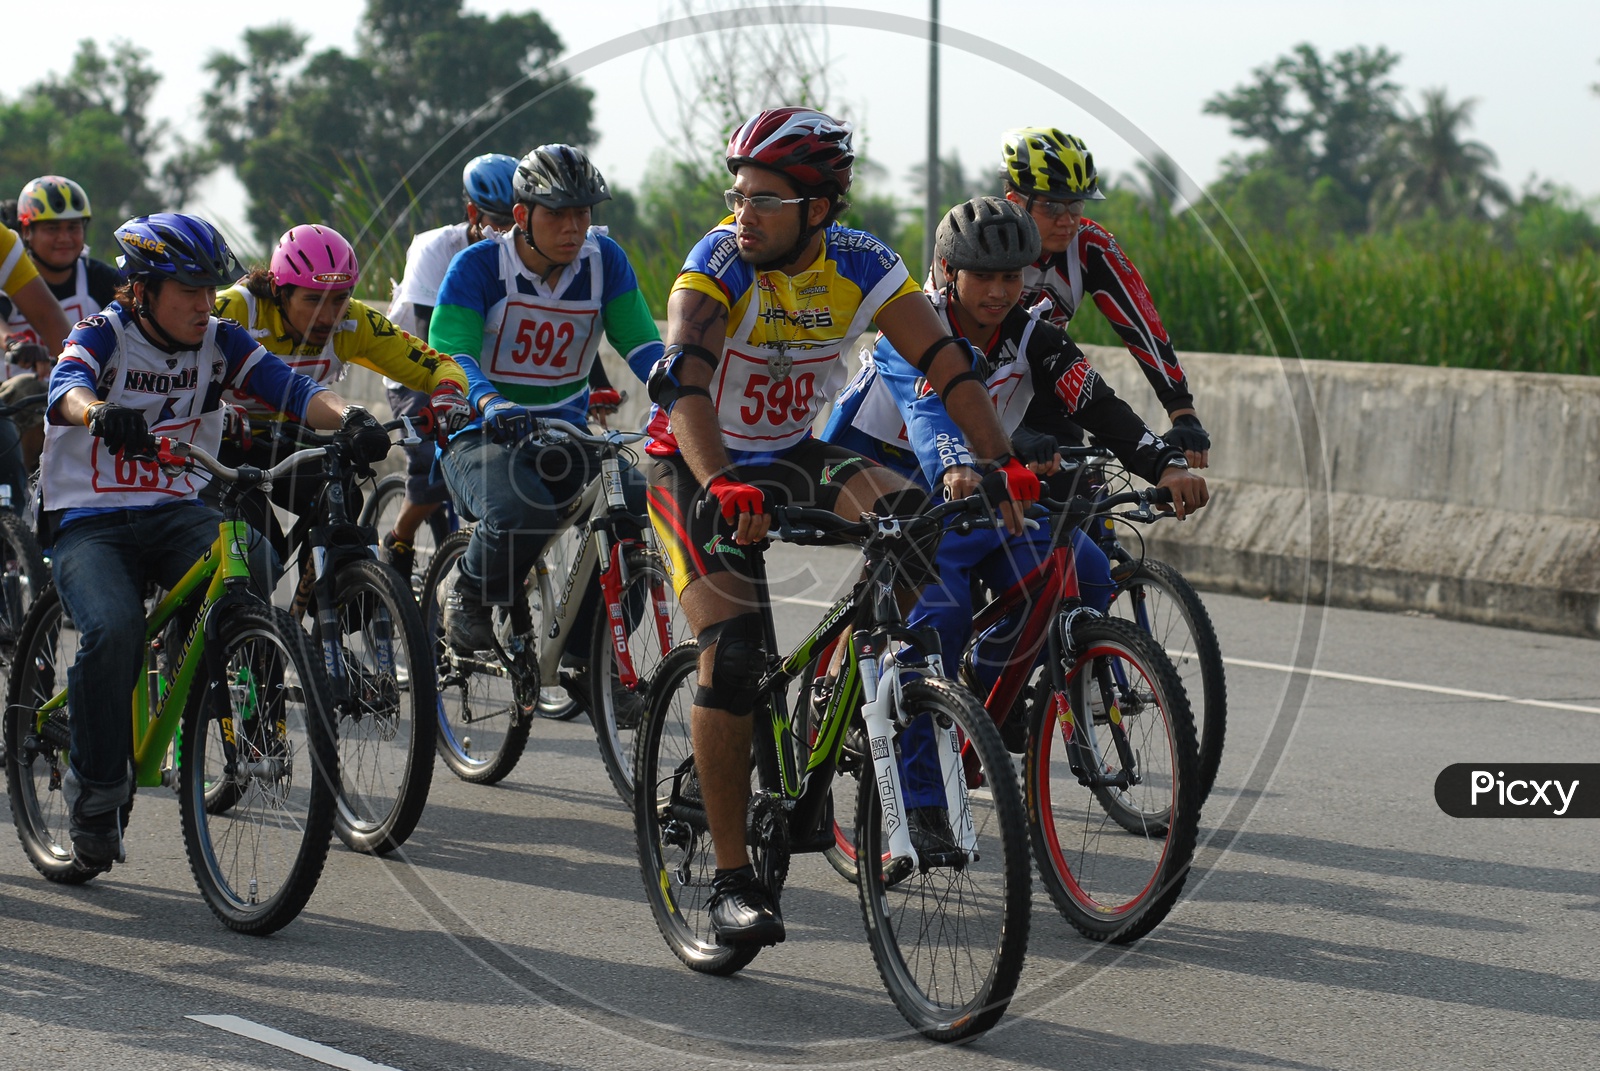 Young Athlete Participating in a Bicycle Race Or Cycle Race